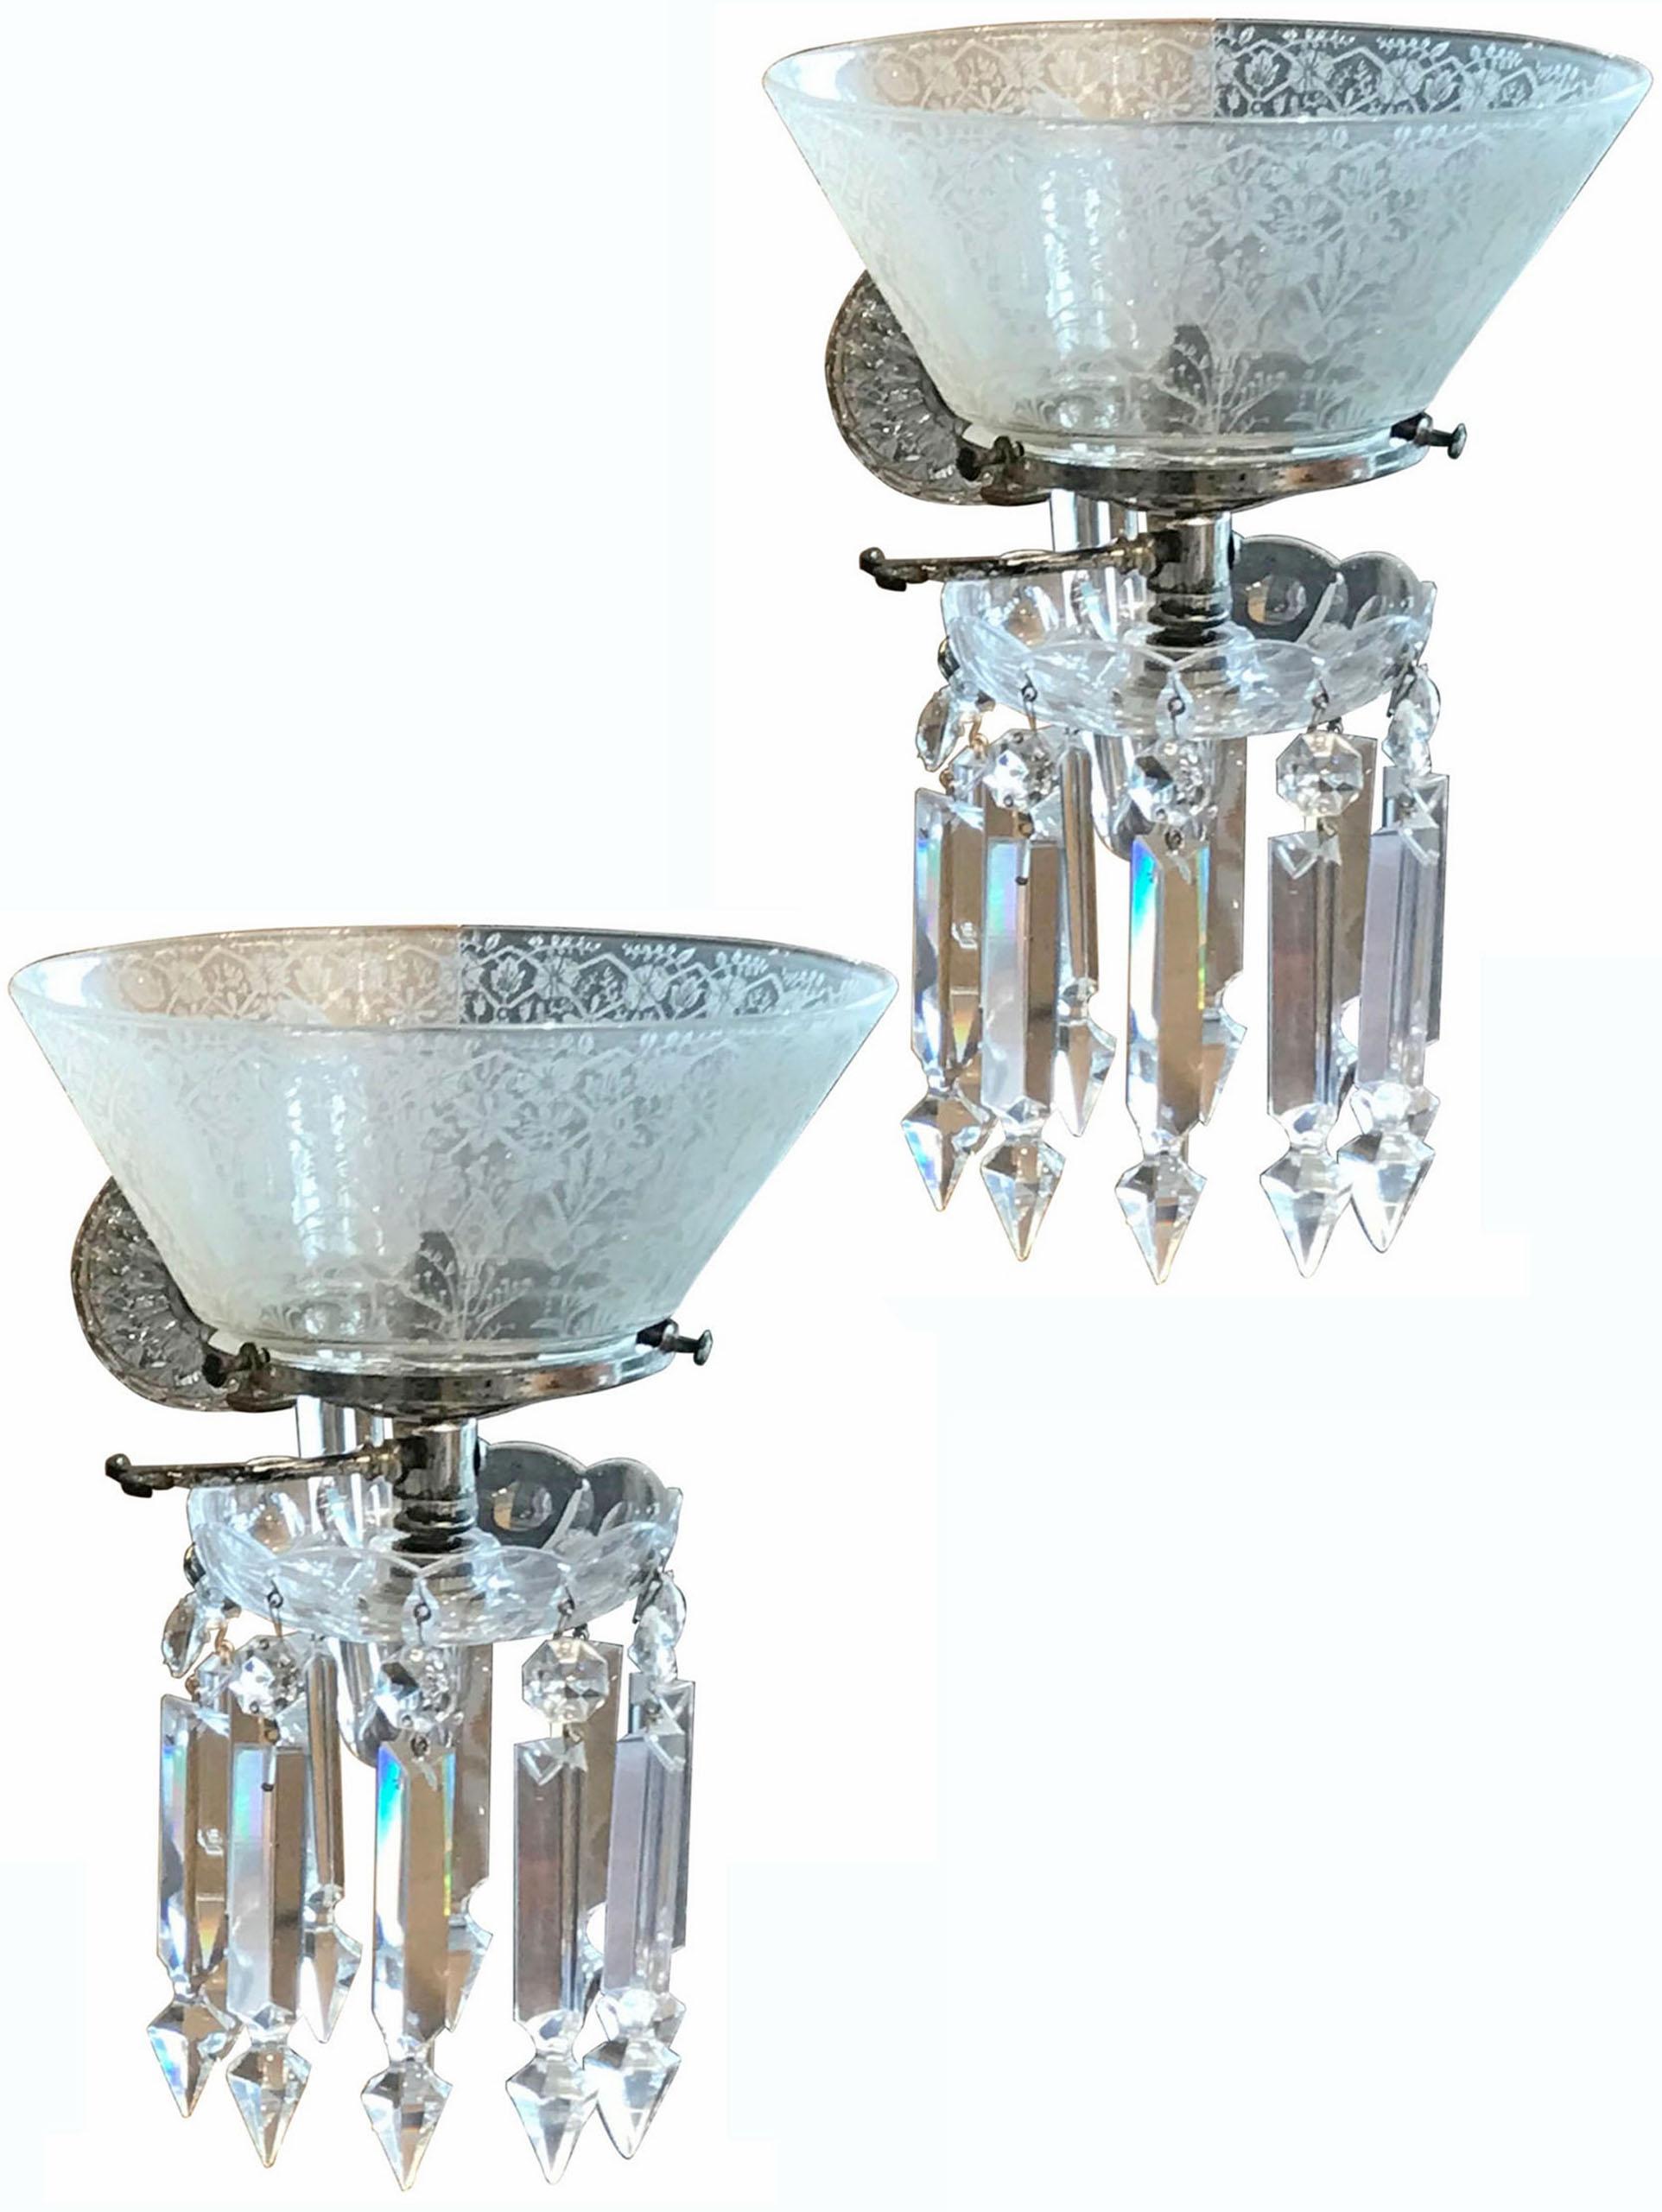 Pair of crystal gasolier wall sconces. France, circa 1870
Dimensions: Height 11 1/2